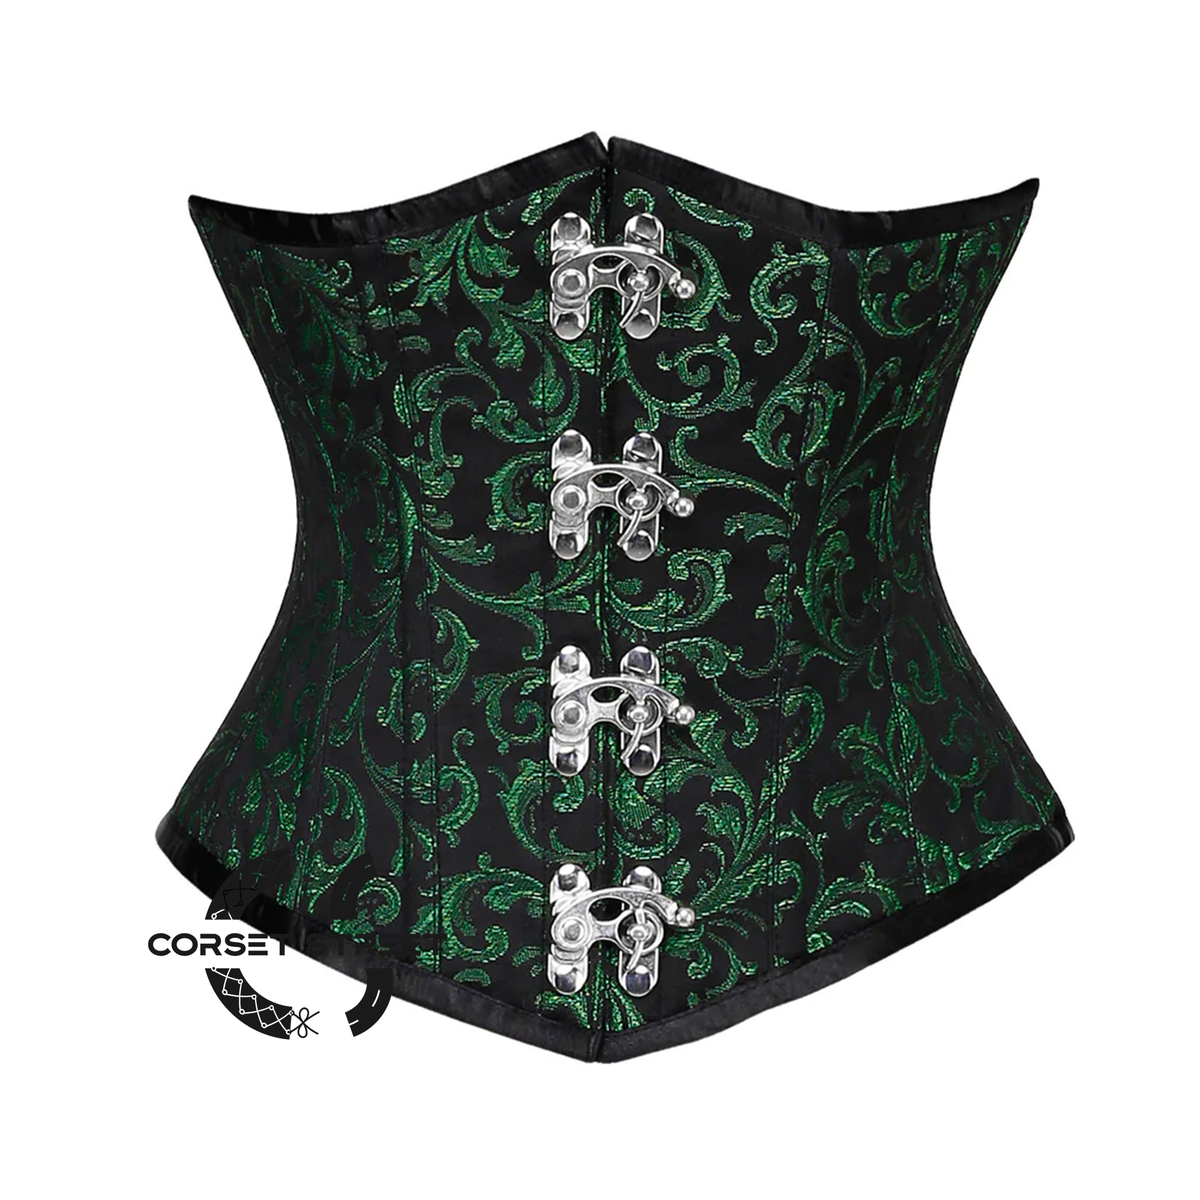 Green And Black Brocade With Front Silver Clasps Underbust Corset Gothic Costume Bustier Top